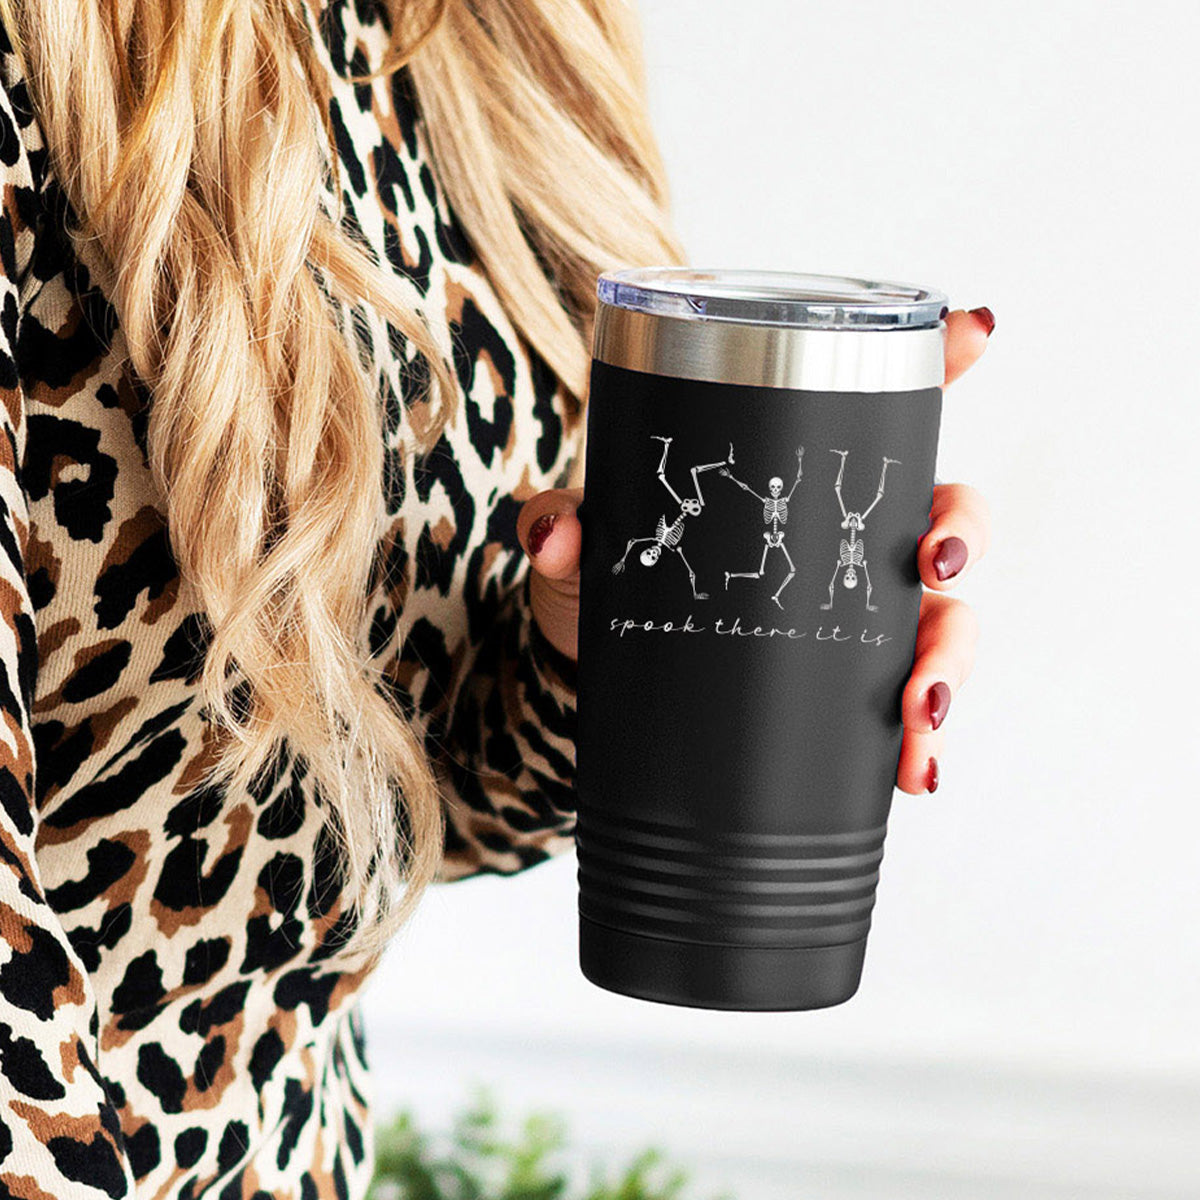 Spook There It Is Black 20oz Insulated Tumbler